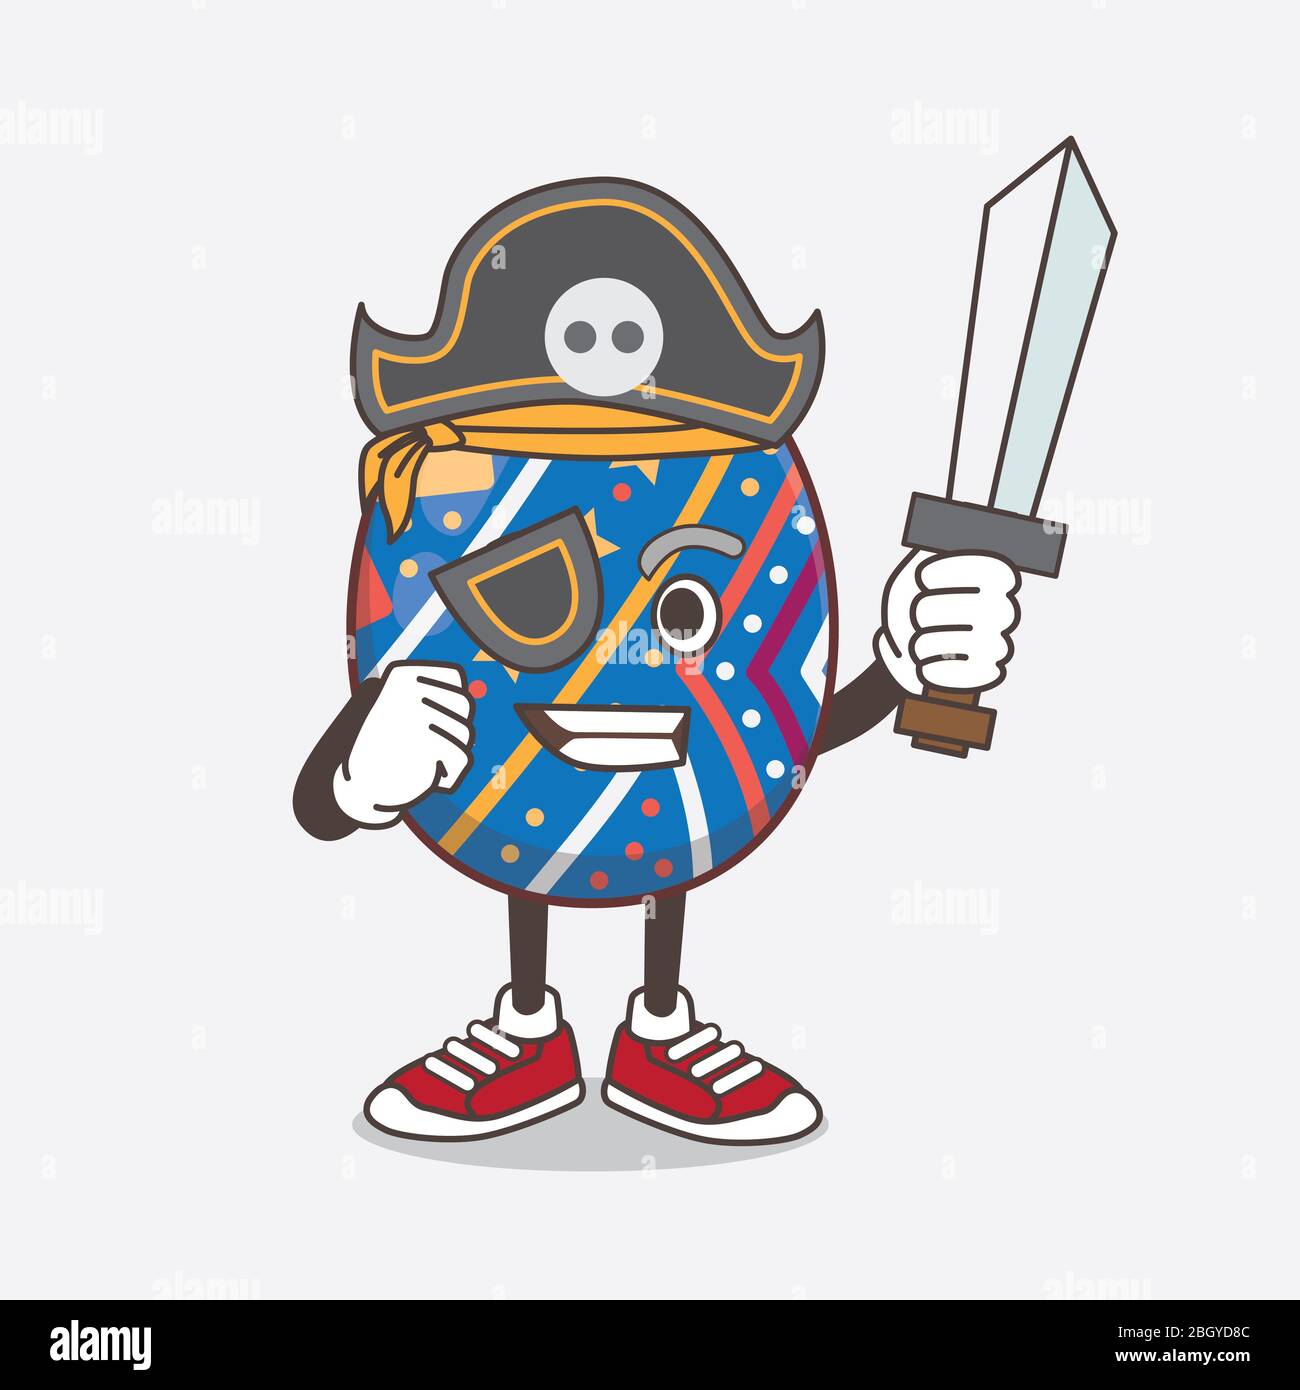 An illustration of Easter Egg cartoon mascot character in pirate style and wearing hat and sword Stock Photo